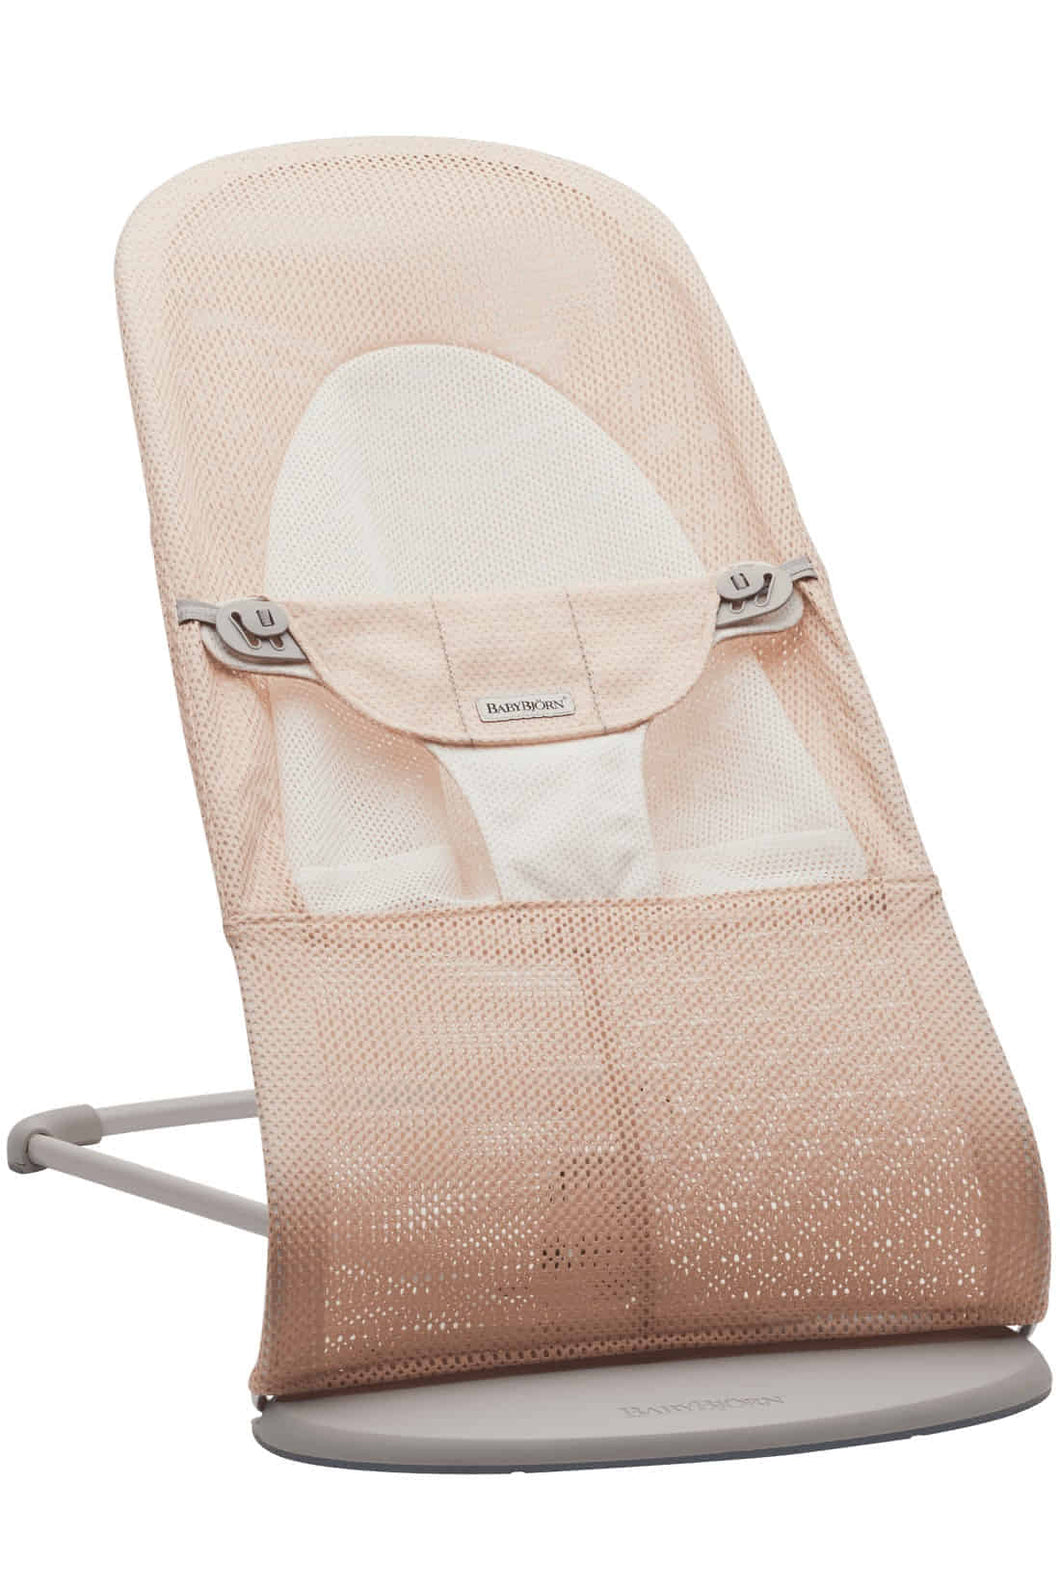 BabyBjorn Bouncer Balance Soft Pearly Pink White Mesh 1